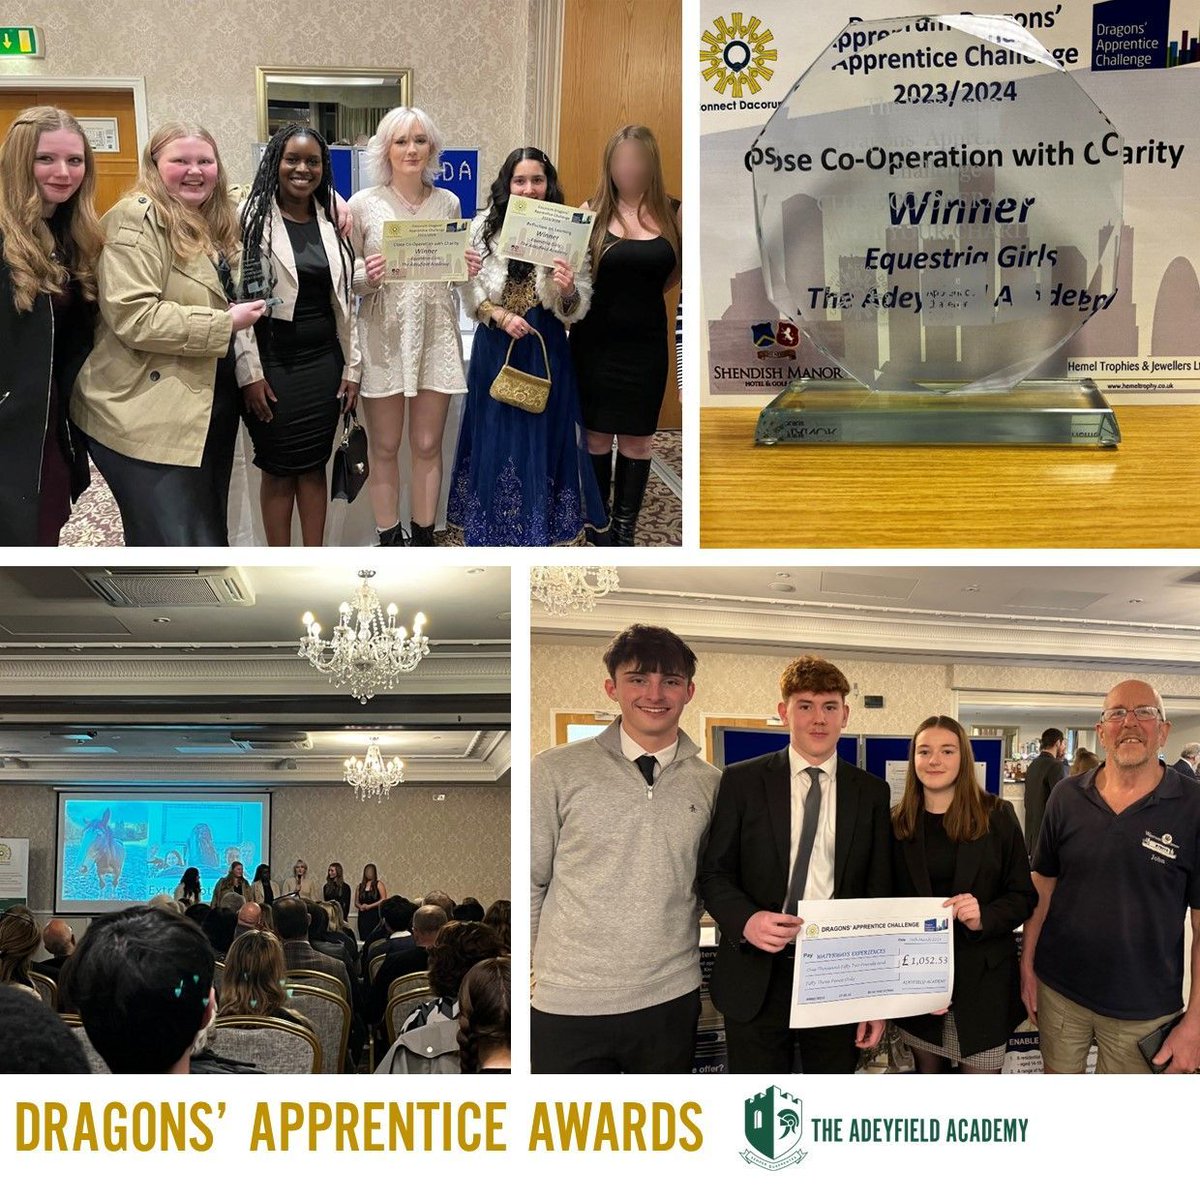 On Tuesday, our sixth form enterprise teams were invited to attend the Dragons’ Apprentice Awards at Shendish Manor. Congratulations to ‘Team Equestria Girls’ who won two awards: ‘Close Cooperation With Charity’ and ‘Reflection On Learning’. #5starstudents #compassion #ambition